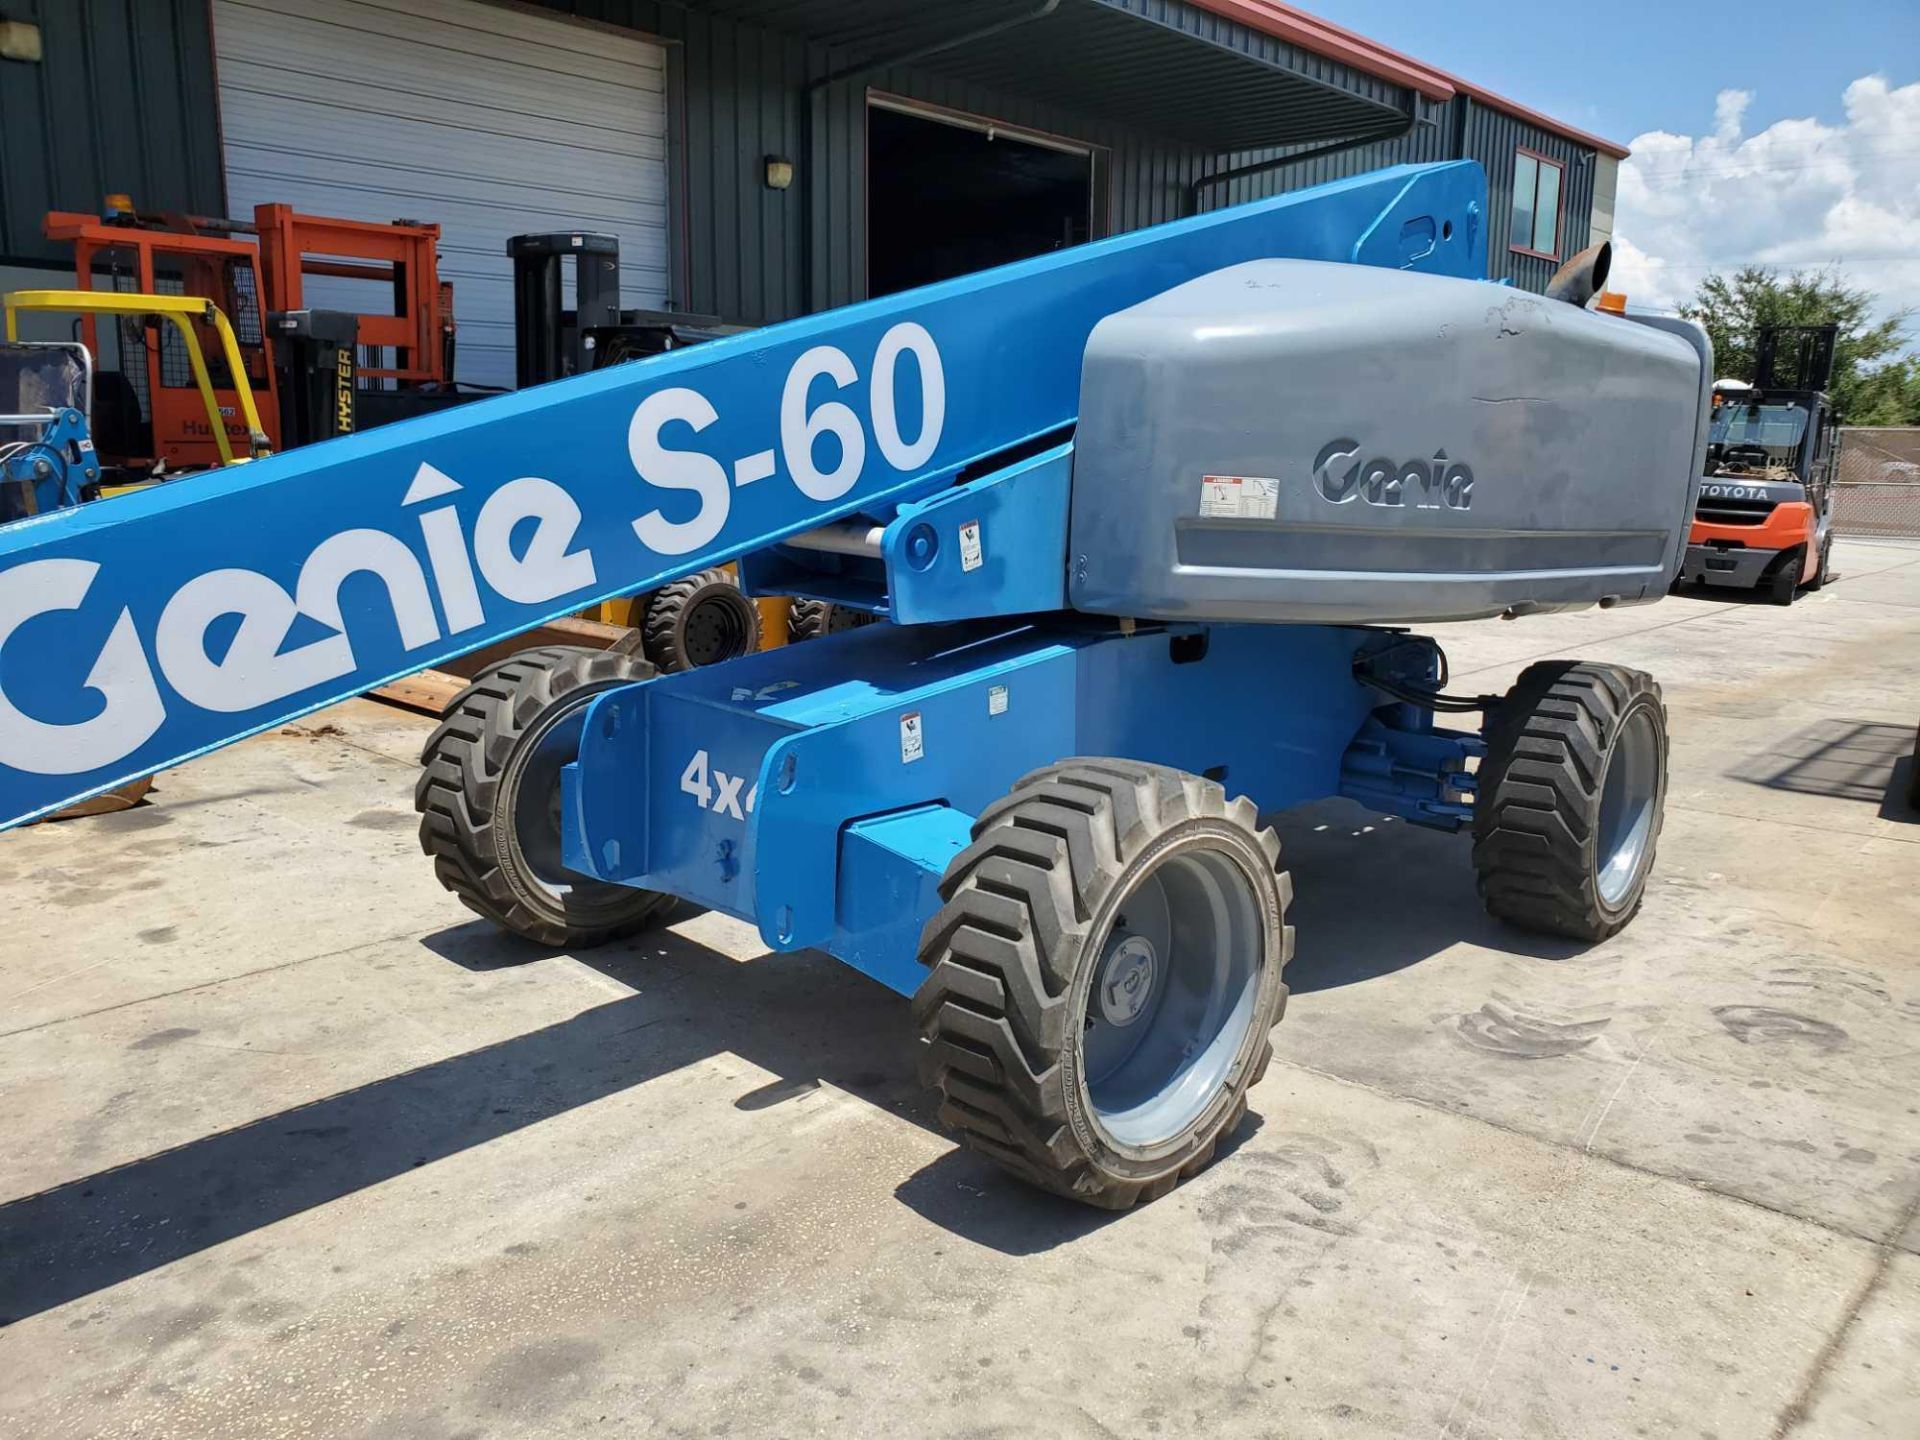 2007 GENIE S-60 60' AERIAL LIFT, FOAM FILLED, 4x4, 2467HRS, - Image 3 of 7